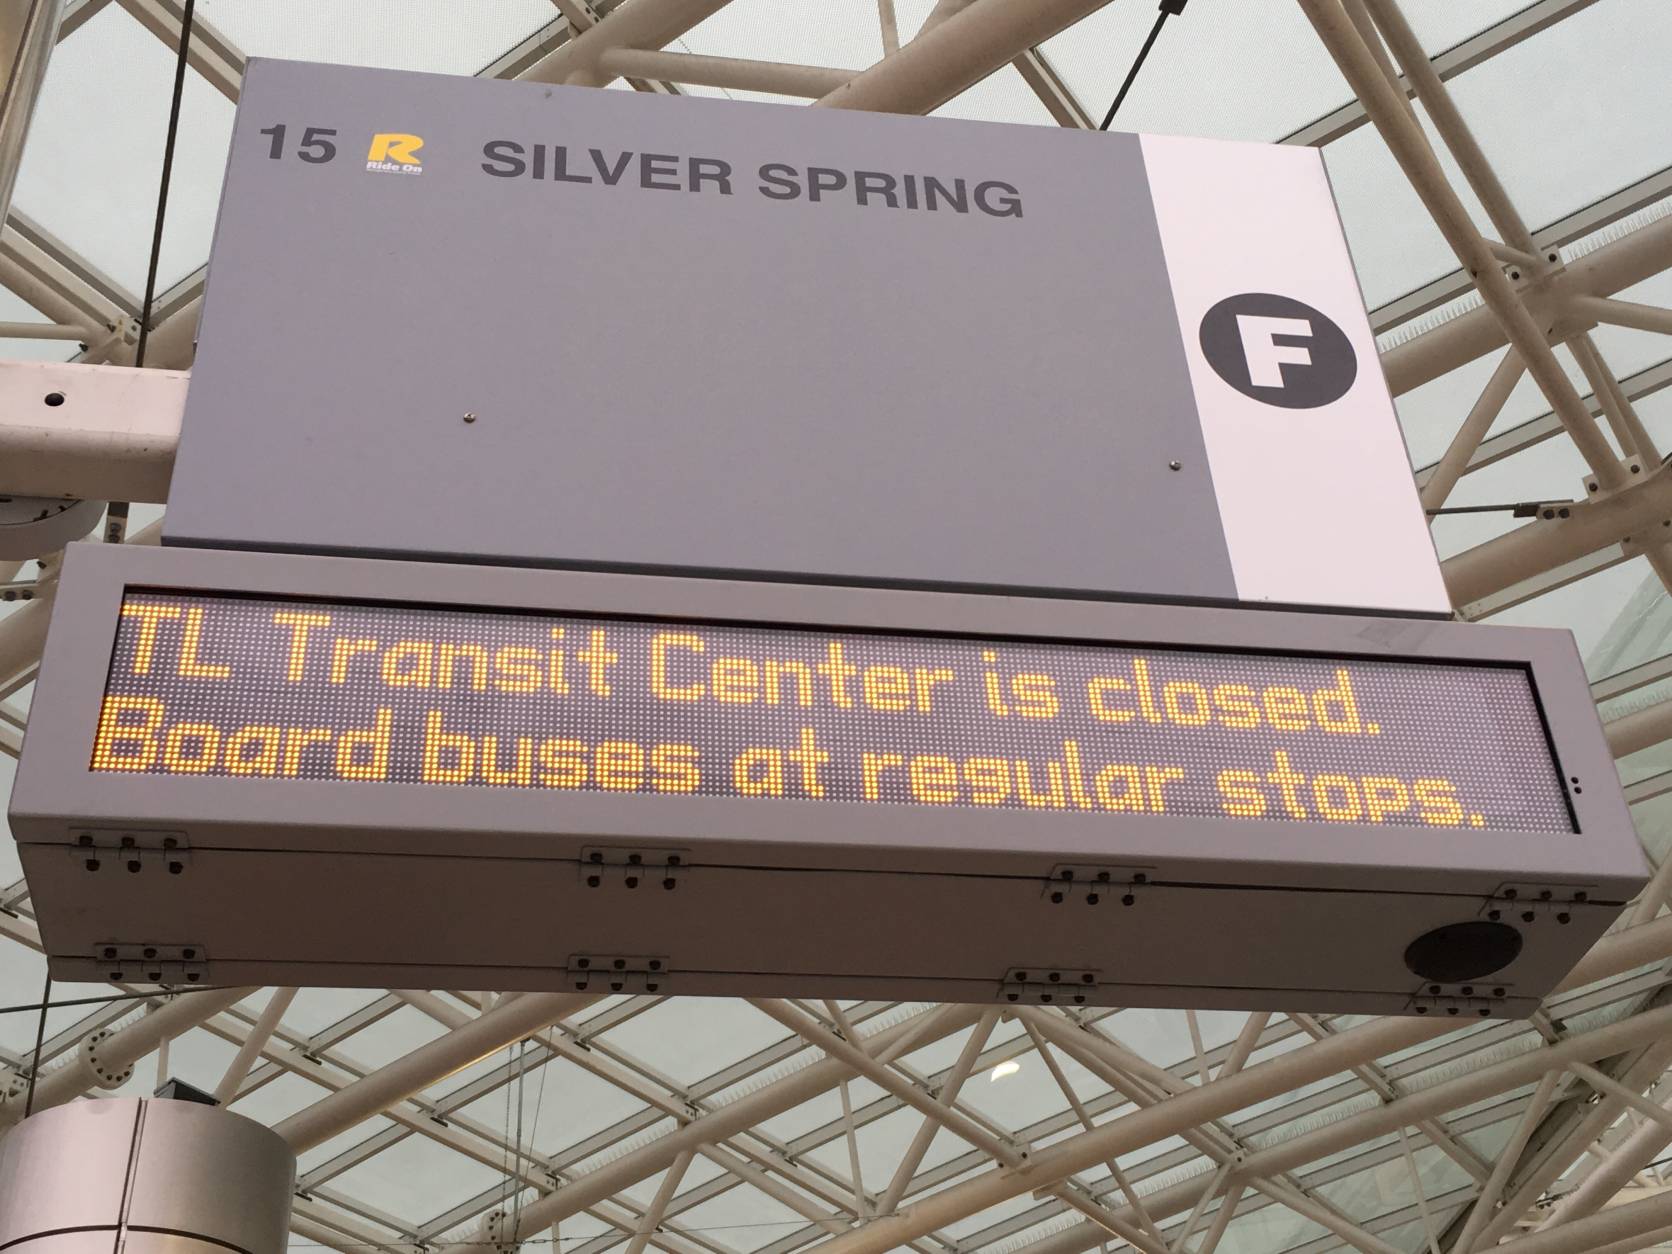 The new transit center in the Langley Park area features screens with arrival times.  obus arrival times. (WTOP/Liz Anderson)